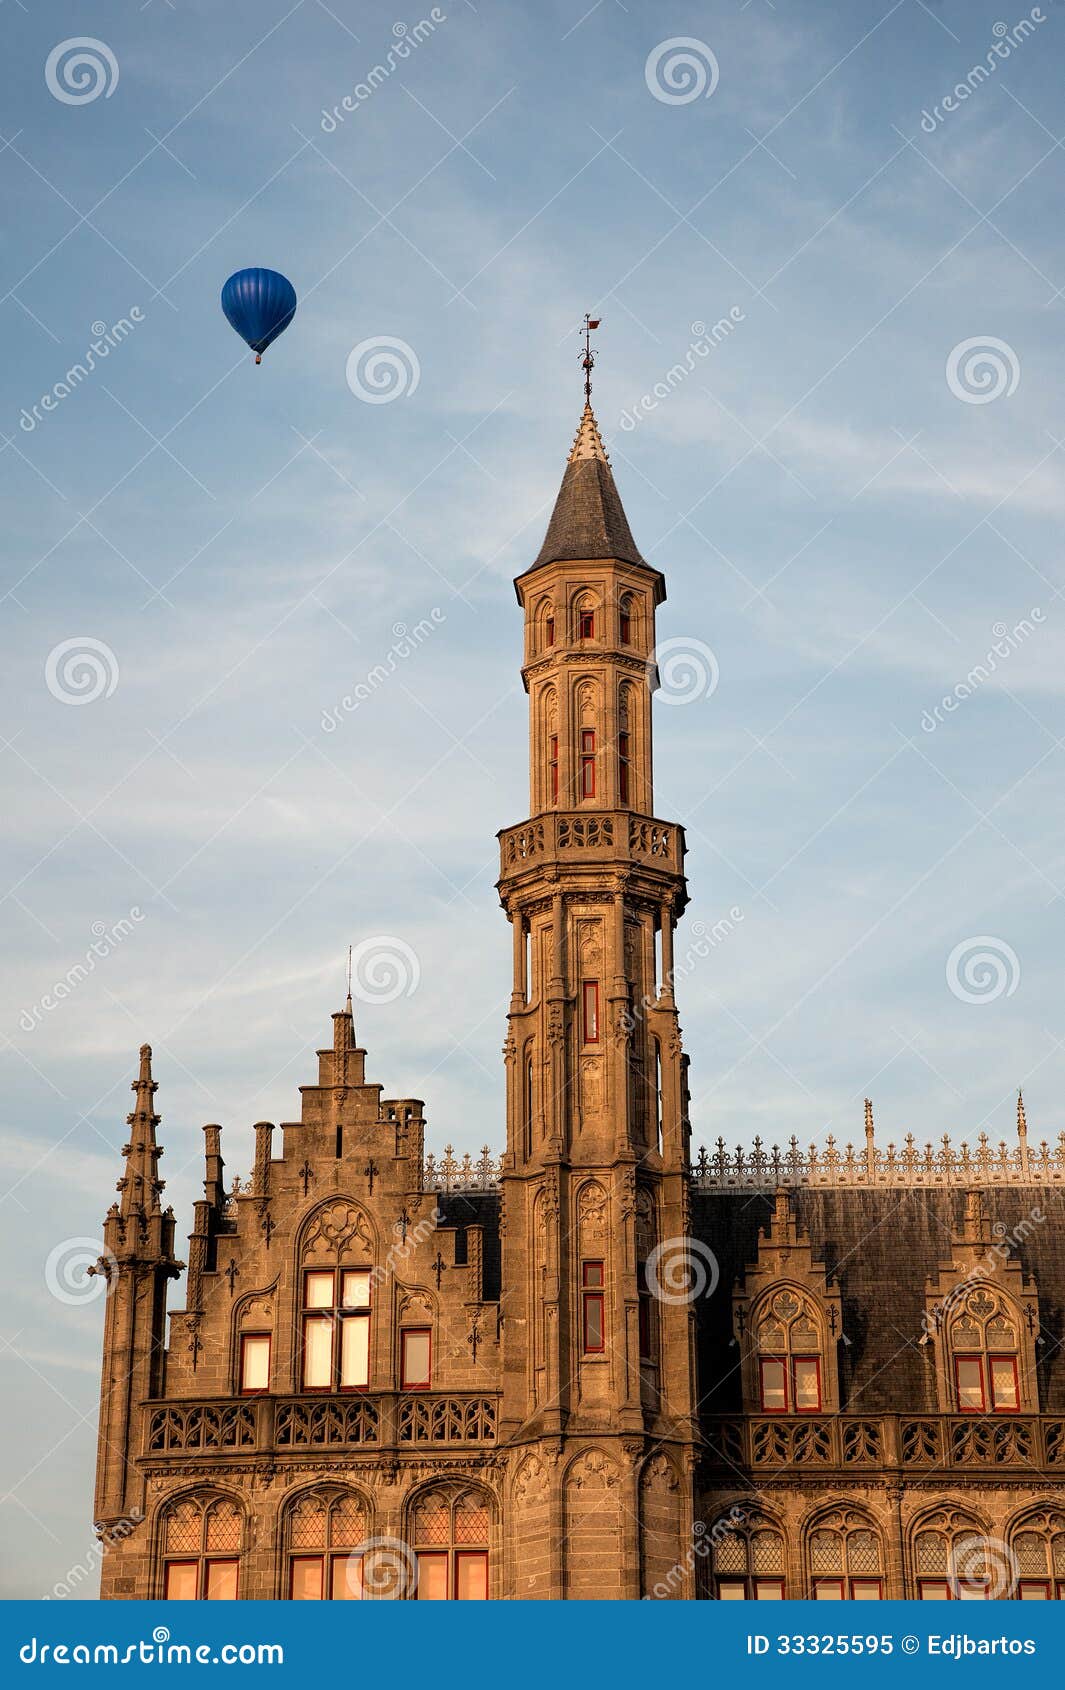 hot air balloon over bruge